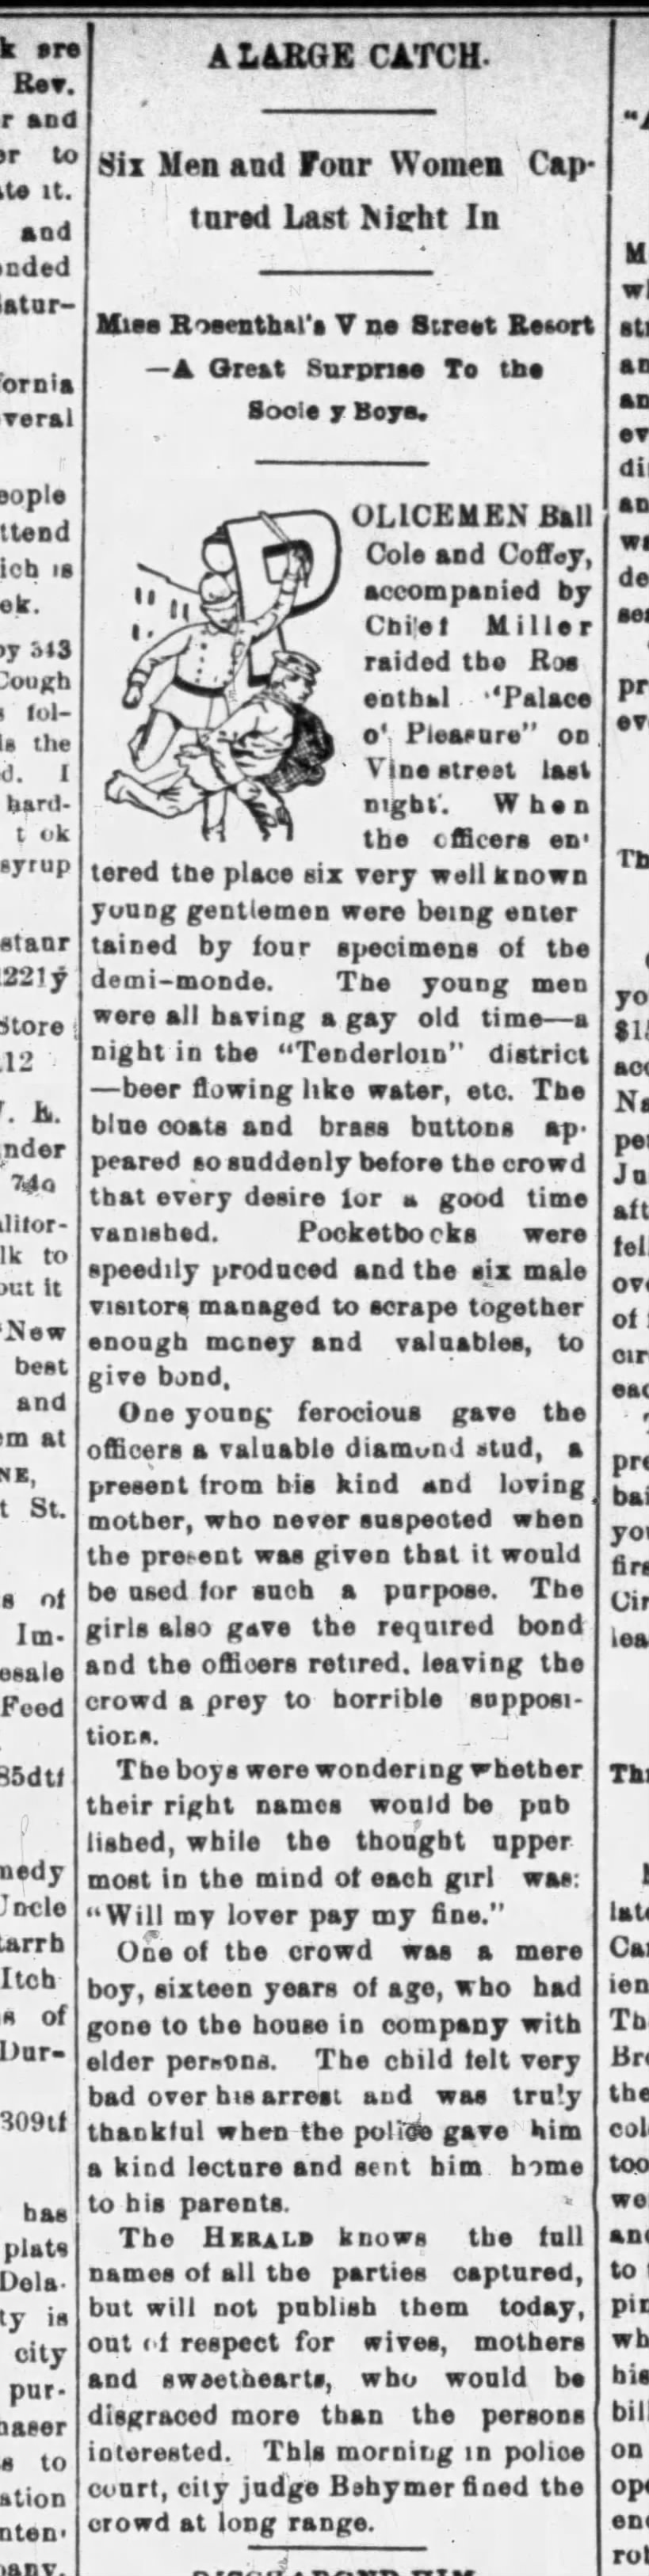 “A Large Catch,” The Muncie Daily Hearld, April 5, 1894.